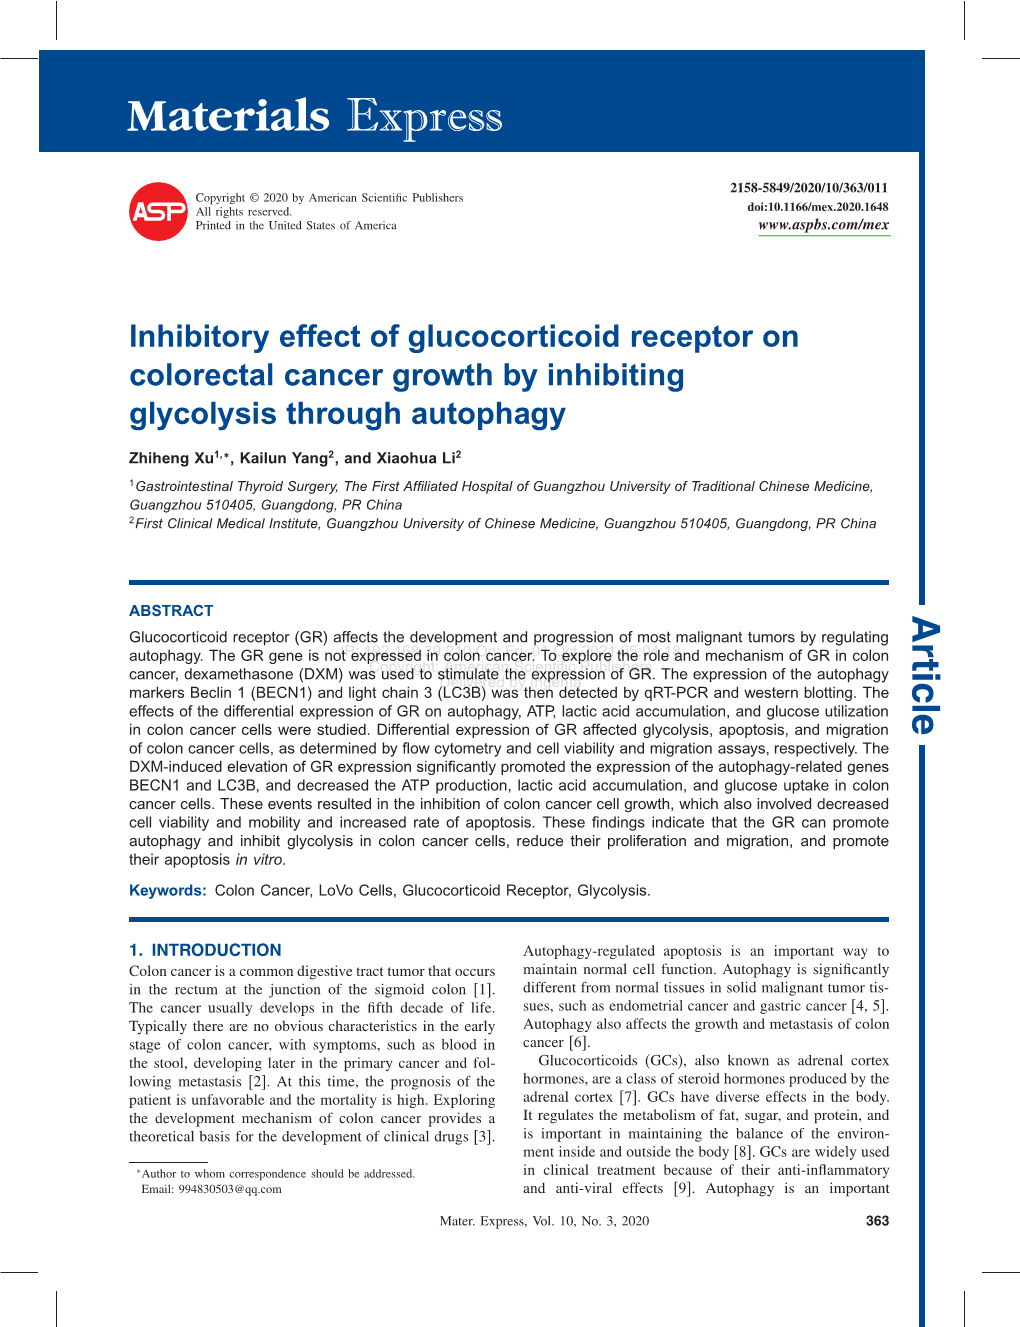 Inhibitory Effect of Glucocorticoid Receptor on Colorectal Cancer Growth by Inhibiting Glycolysis Through Autophagy